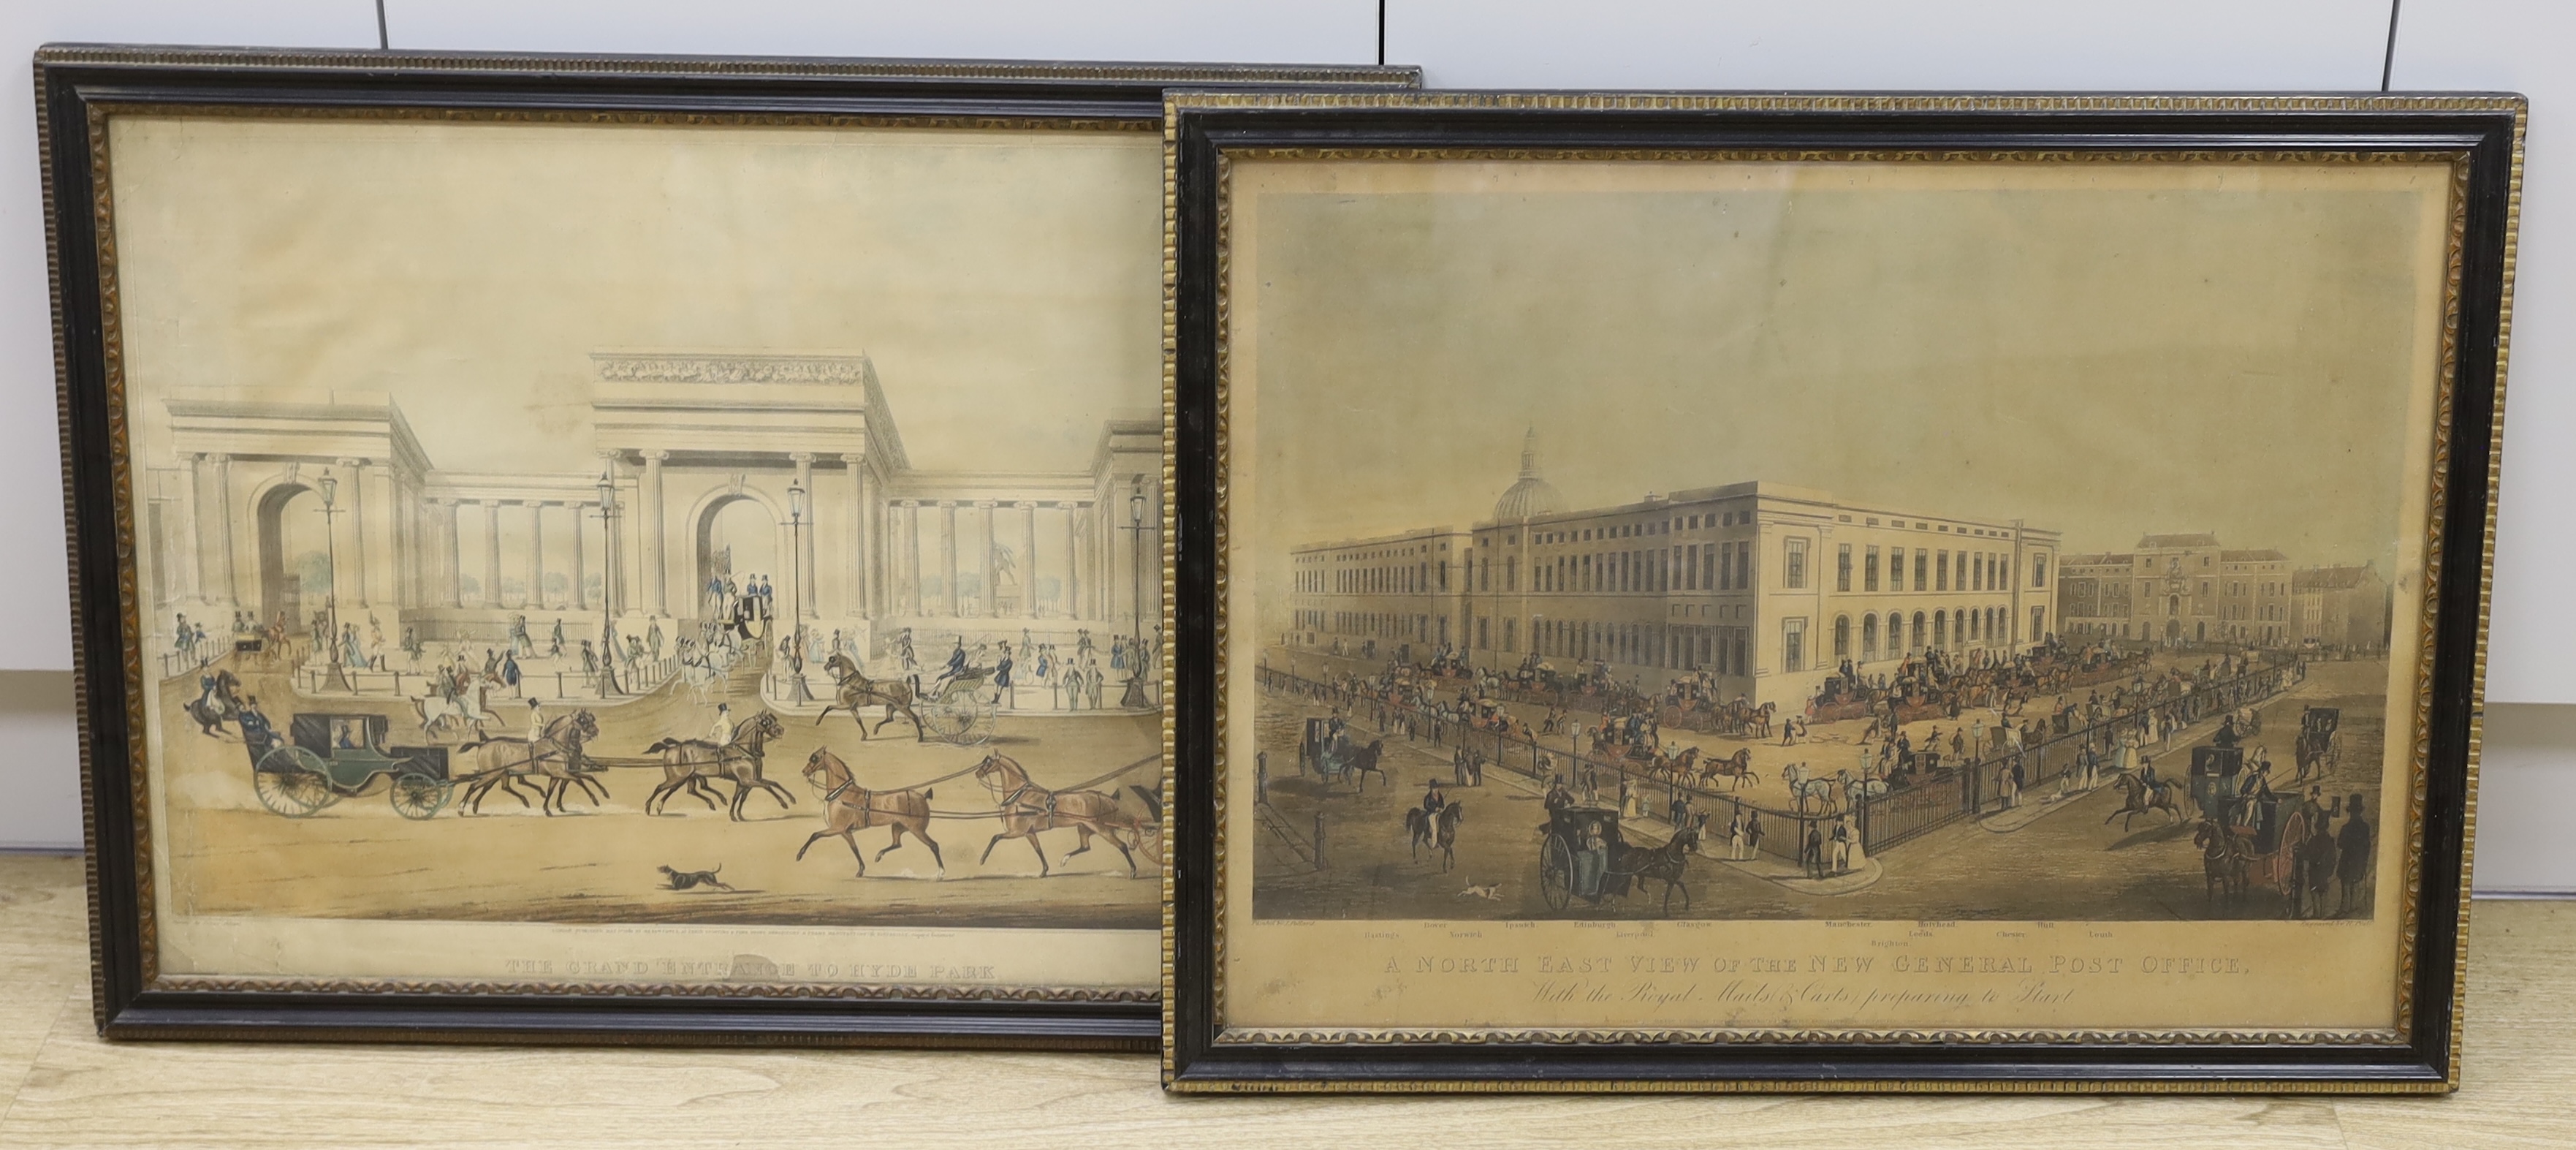 Rosenberg after James Pollard, two coloured aquatints, 'North East View of the New General Post Office' and 'The Grand Entrance to Hyde Park', largest overall 46 x 62cm